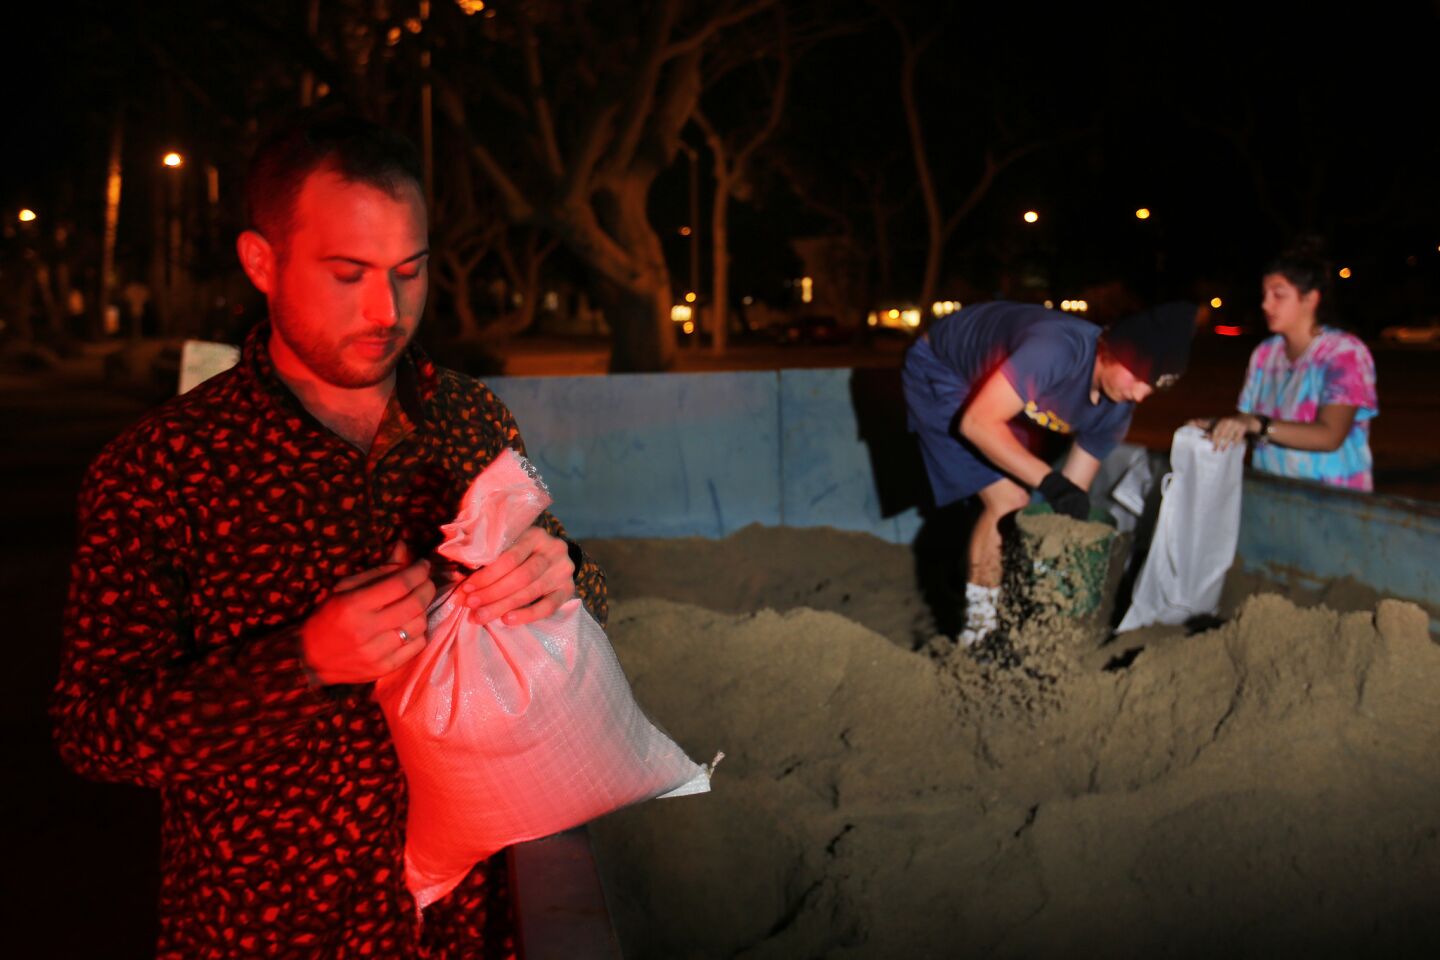 Noah Cowan of Long Beach, fills sandbags along with others as they prepare for the arrival of the first major storm of what is expected to be a strong El Niño weather event in Southern California.